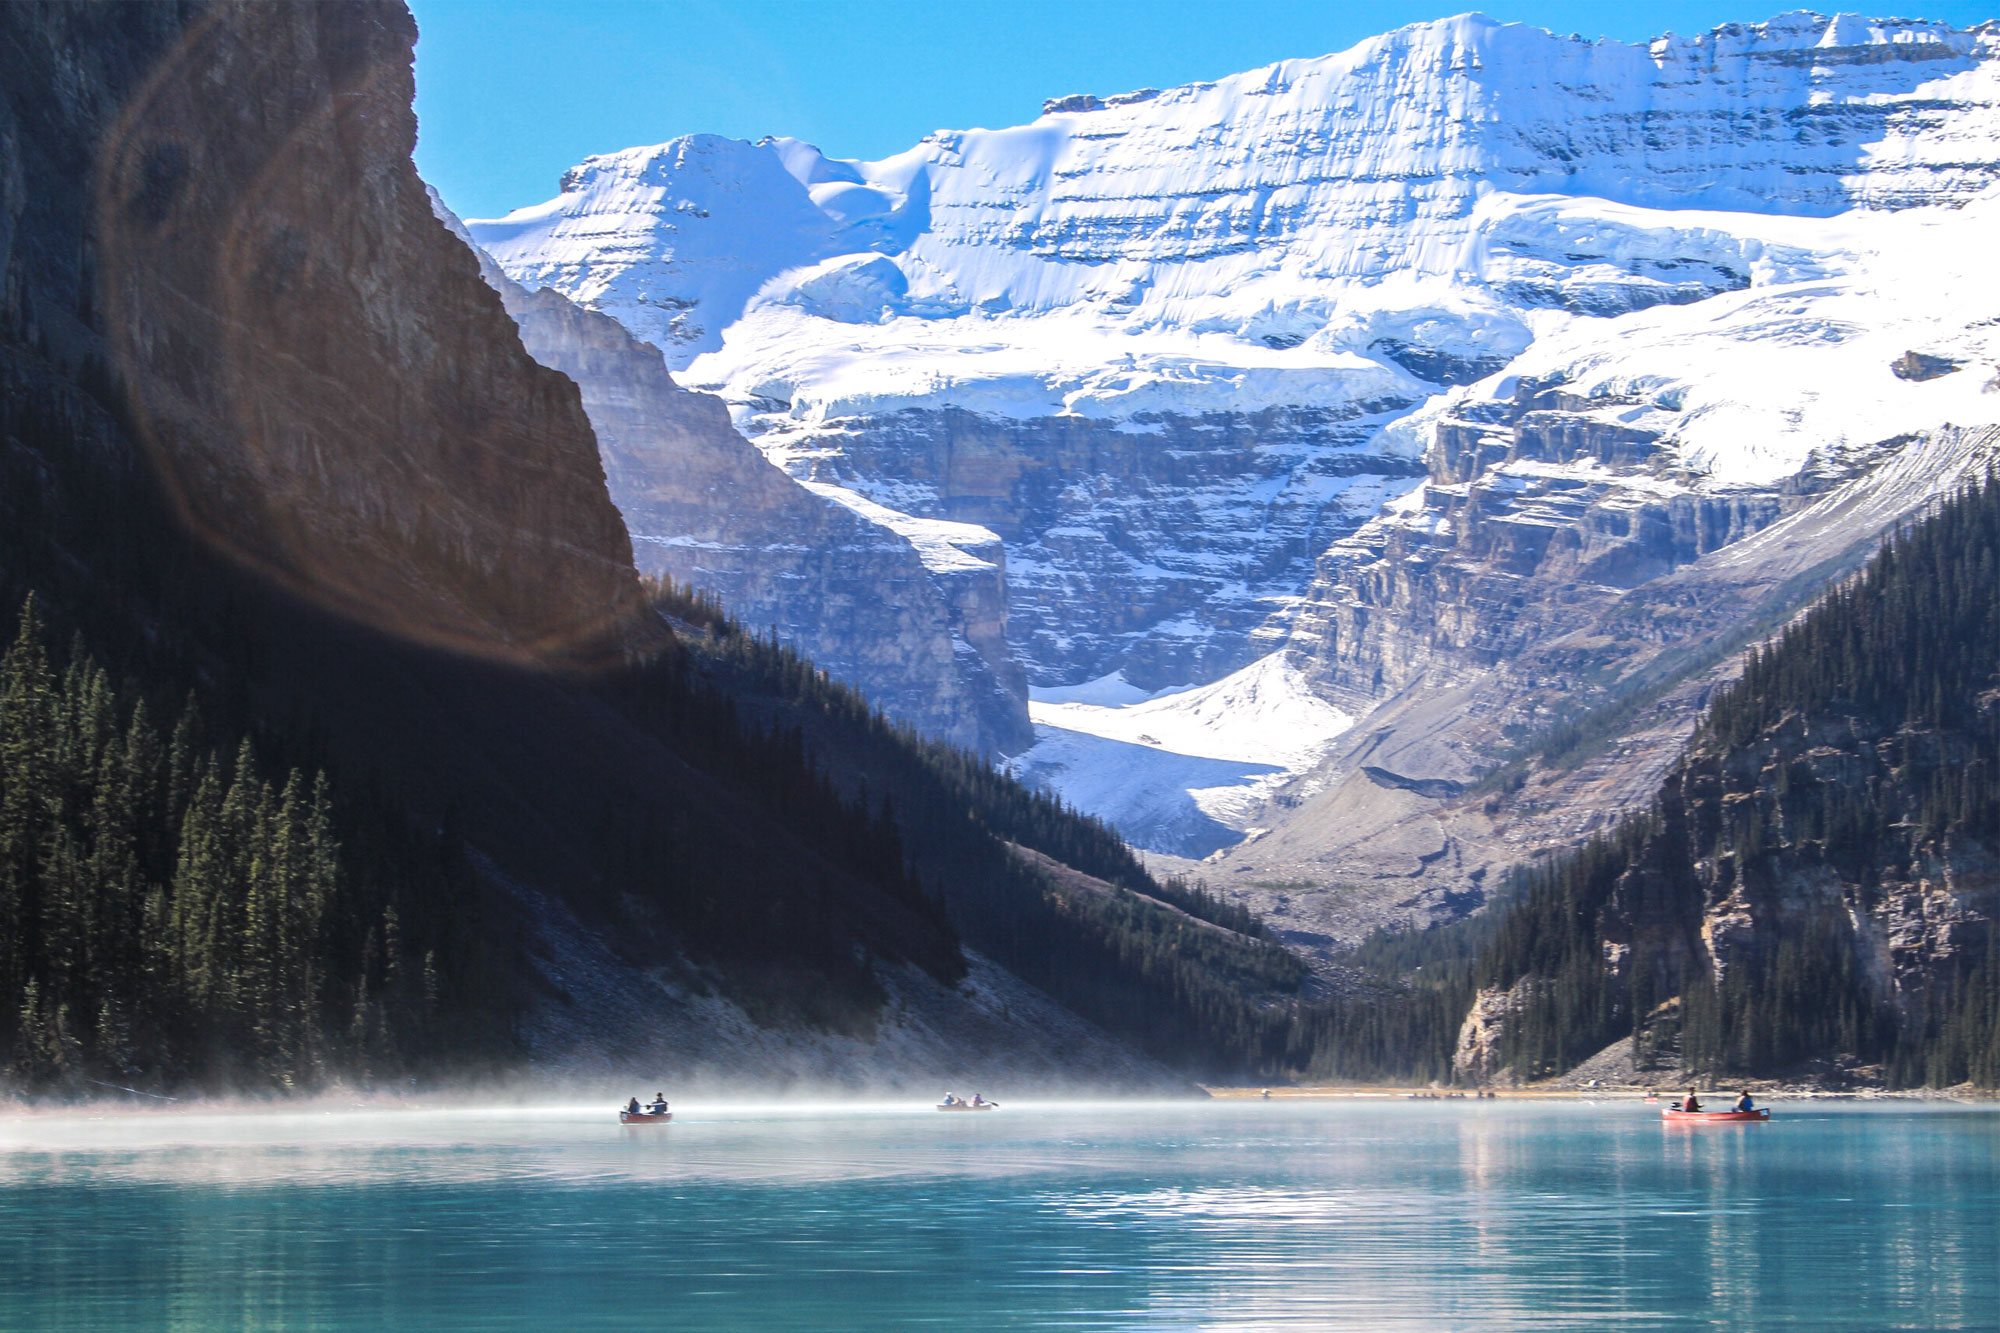 Lake-Louise in the morning is one of the top things to do in Banff